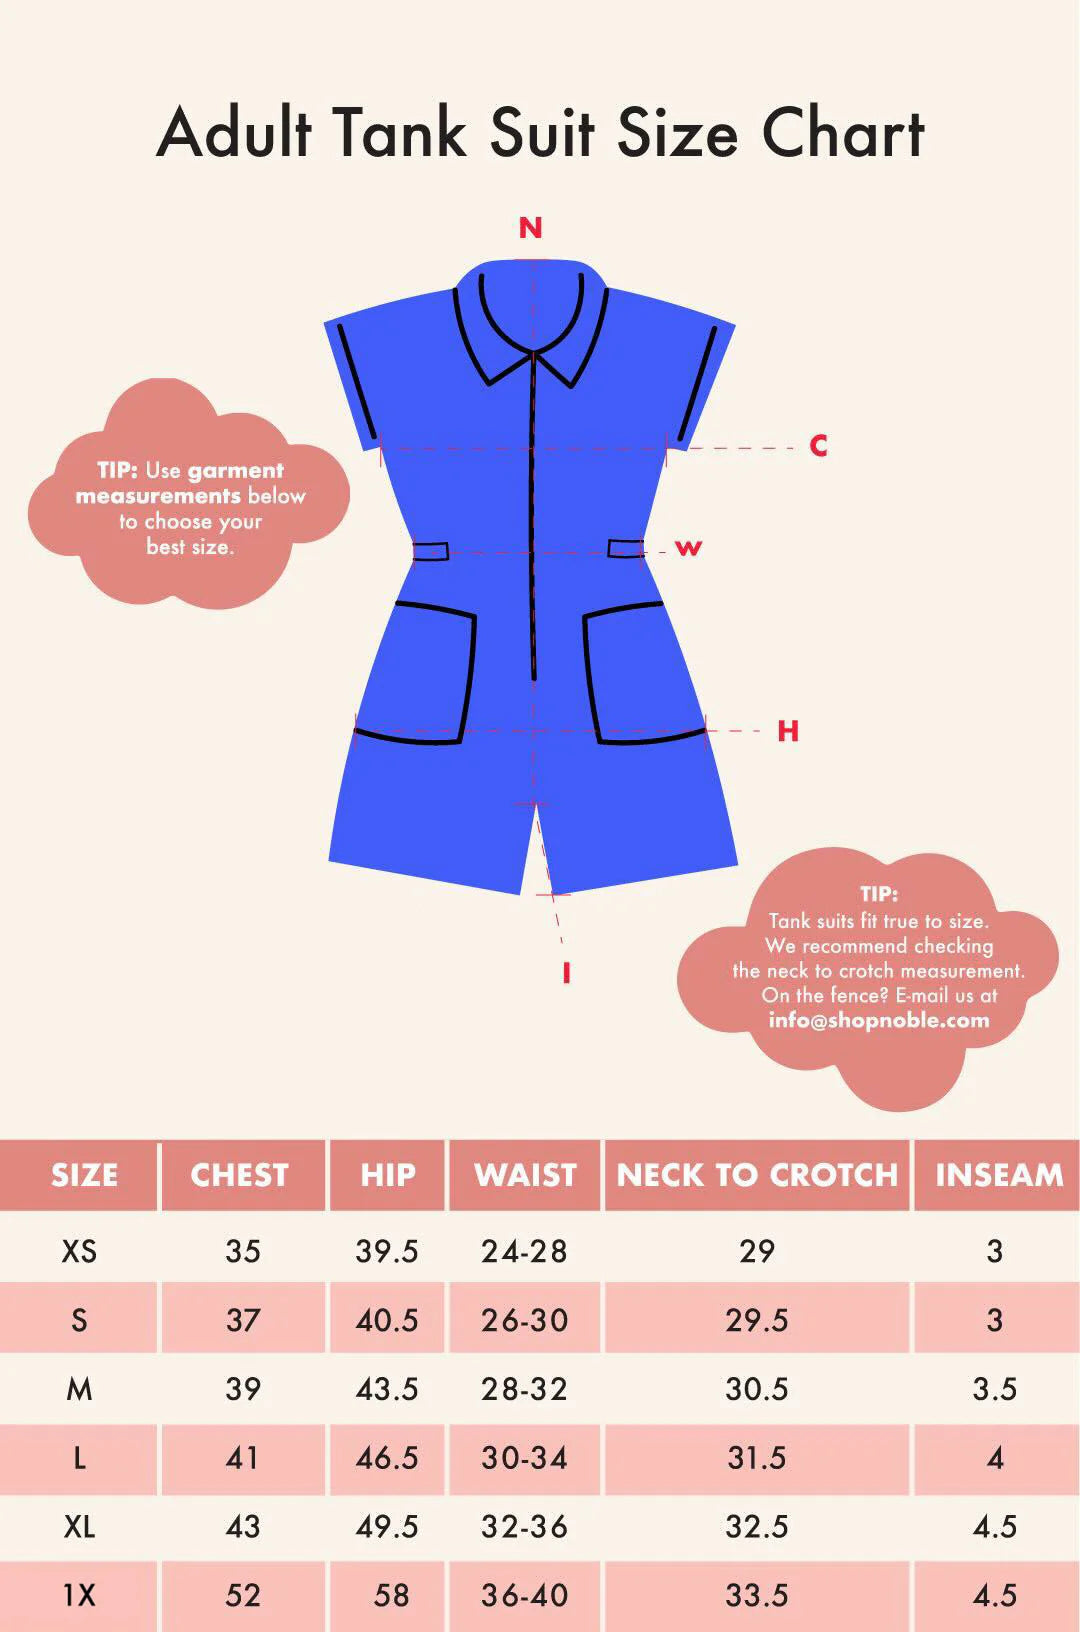 The size chart for the adult tank suit. 